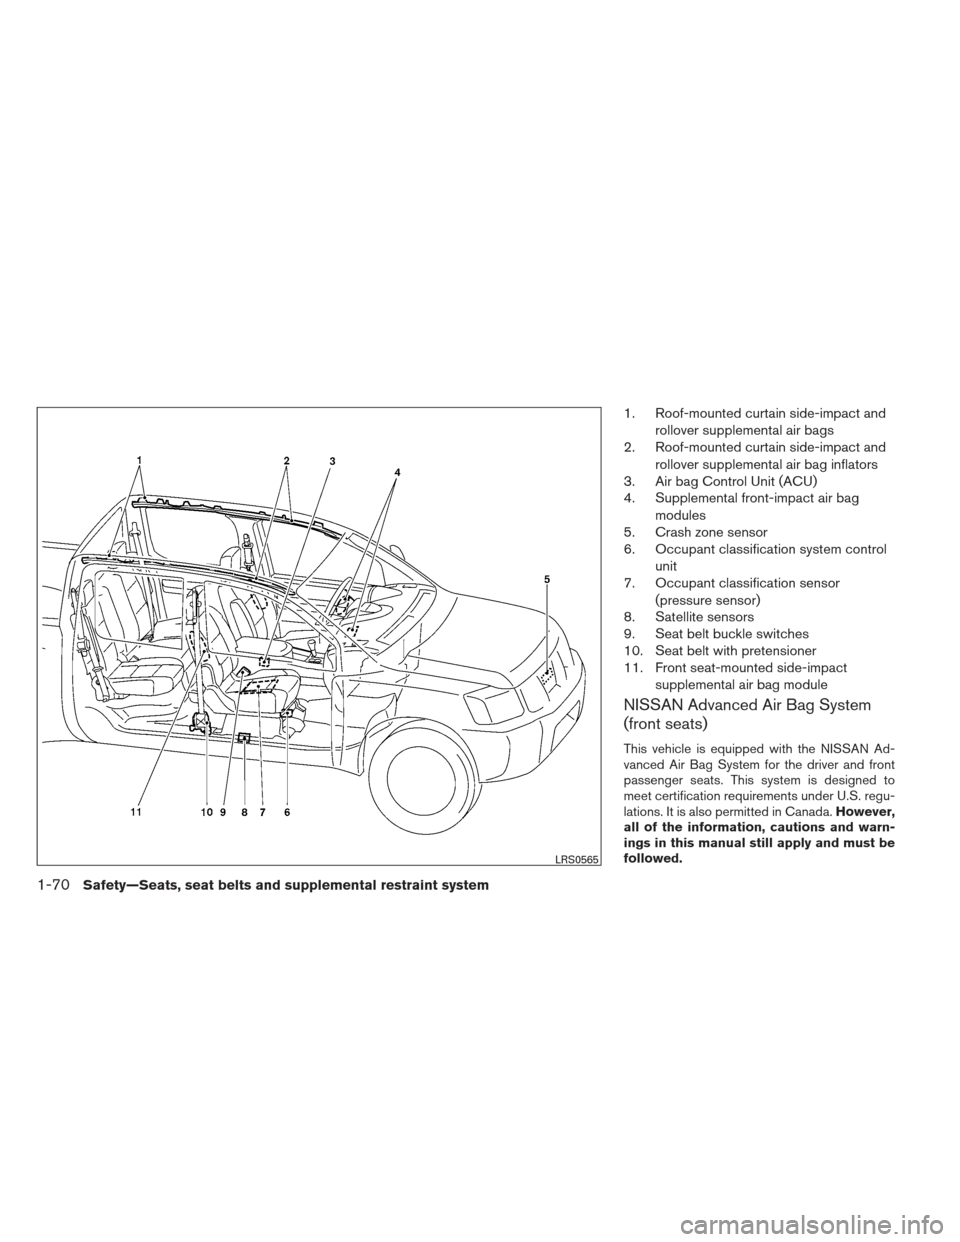 NISSAN FRONTIER 2013 D40 / 2.G Manual Online 1. Roof-mounted curtain side-impact androllover supplemental air bags
2. Roof-mounted curtain side-impact and
rollover supplemental air bag inflators
3. Air bag Control Unit (ACU)
4. Supplemental fron